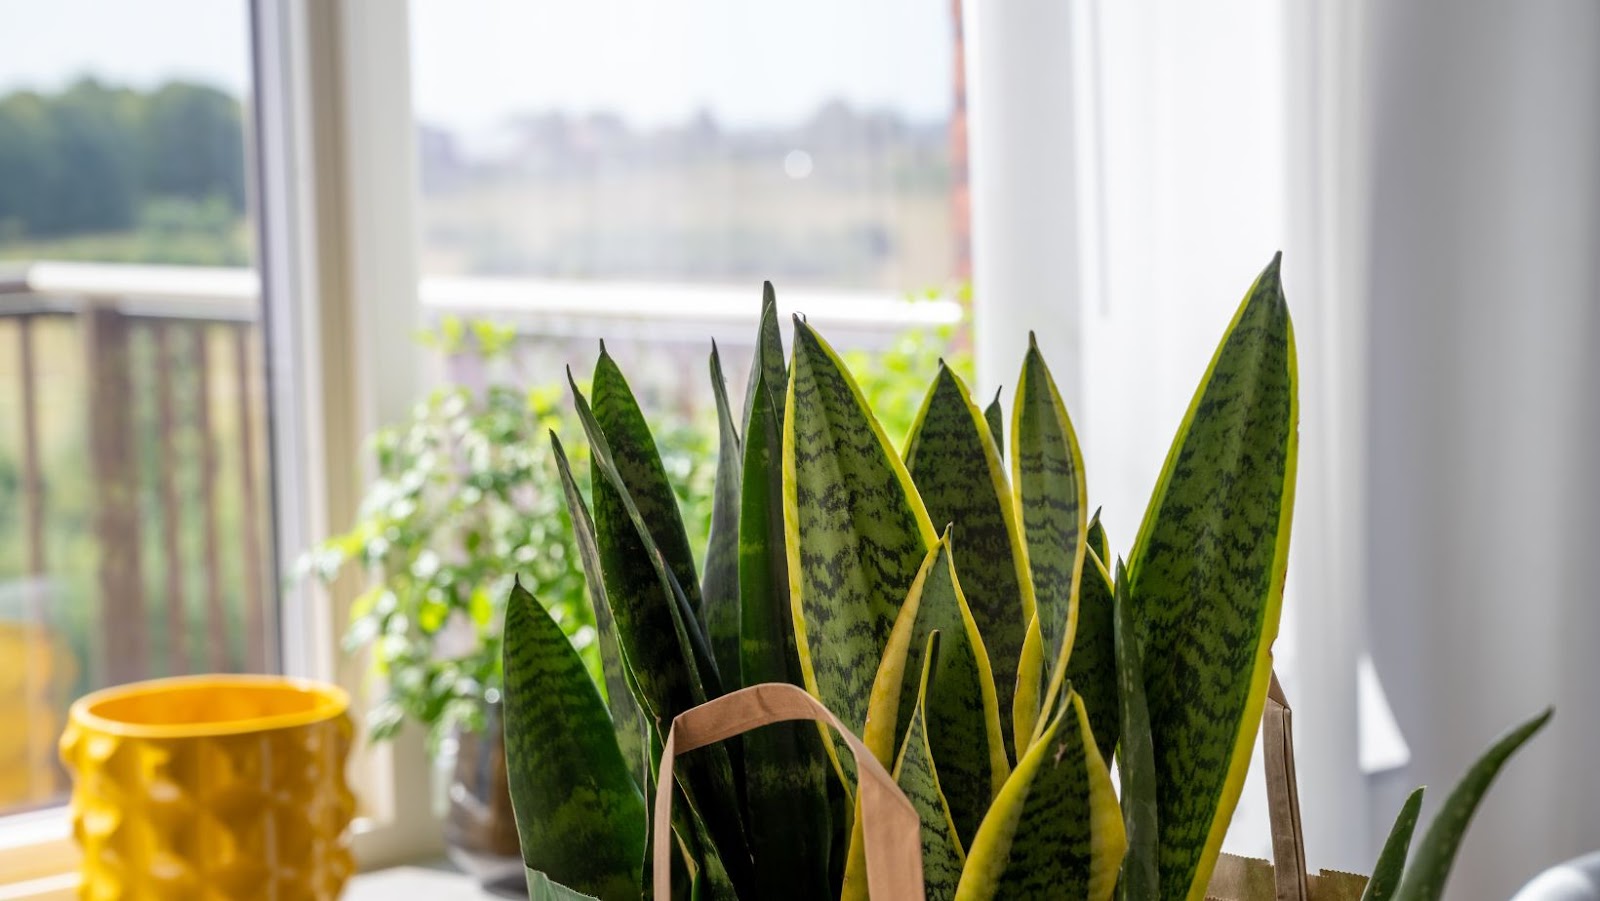 The Similarities Between Sansevieria And Snake Plants